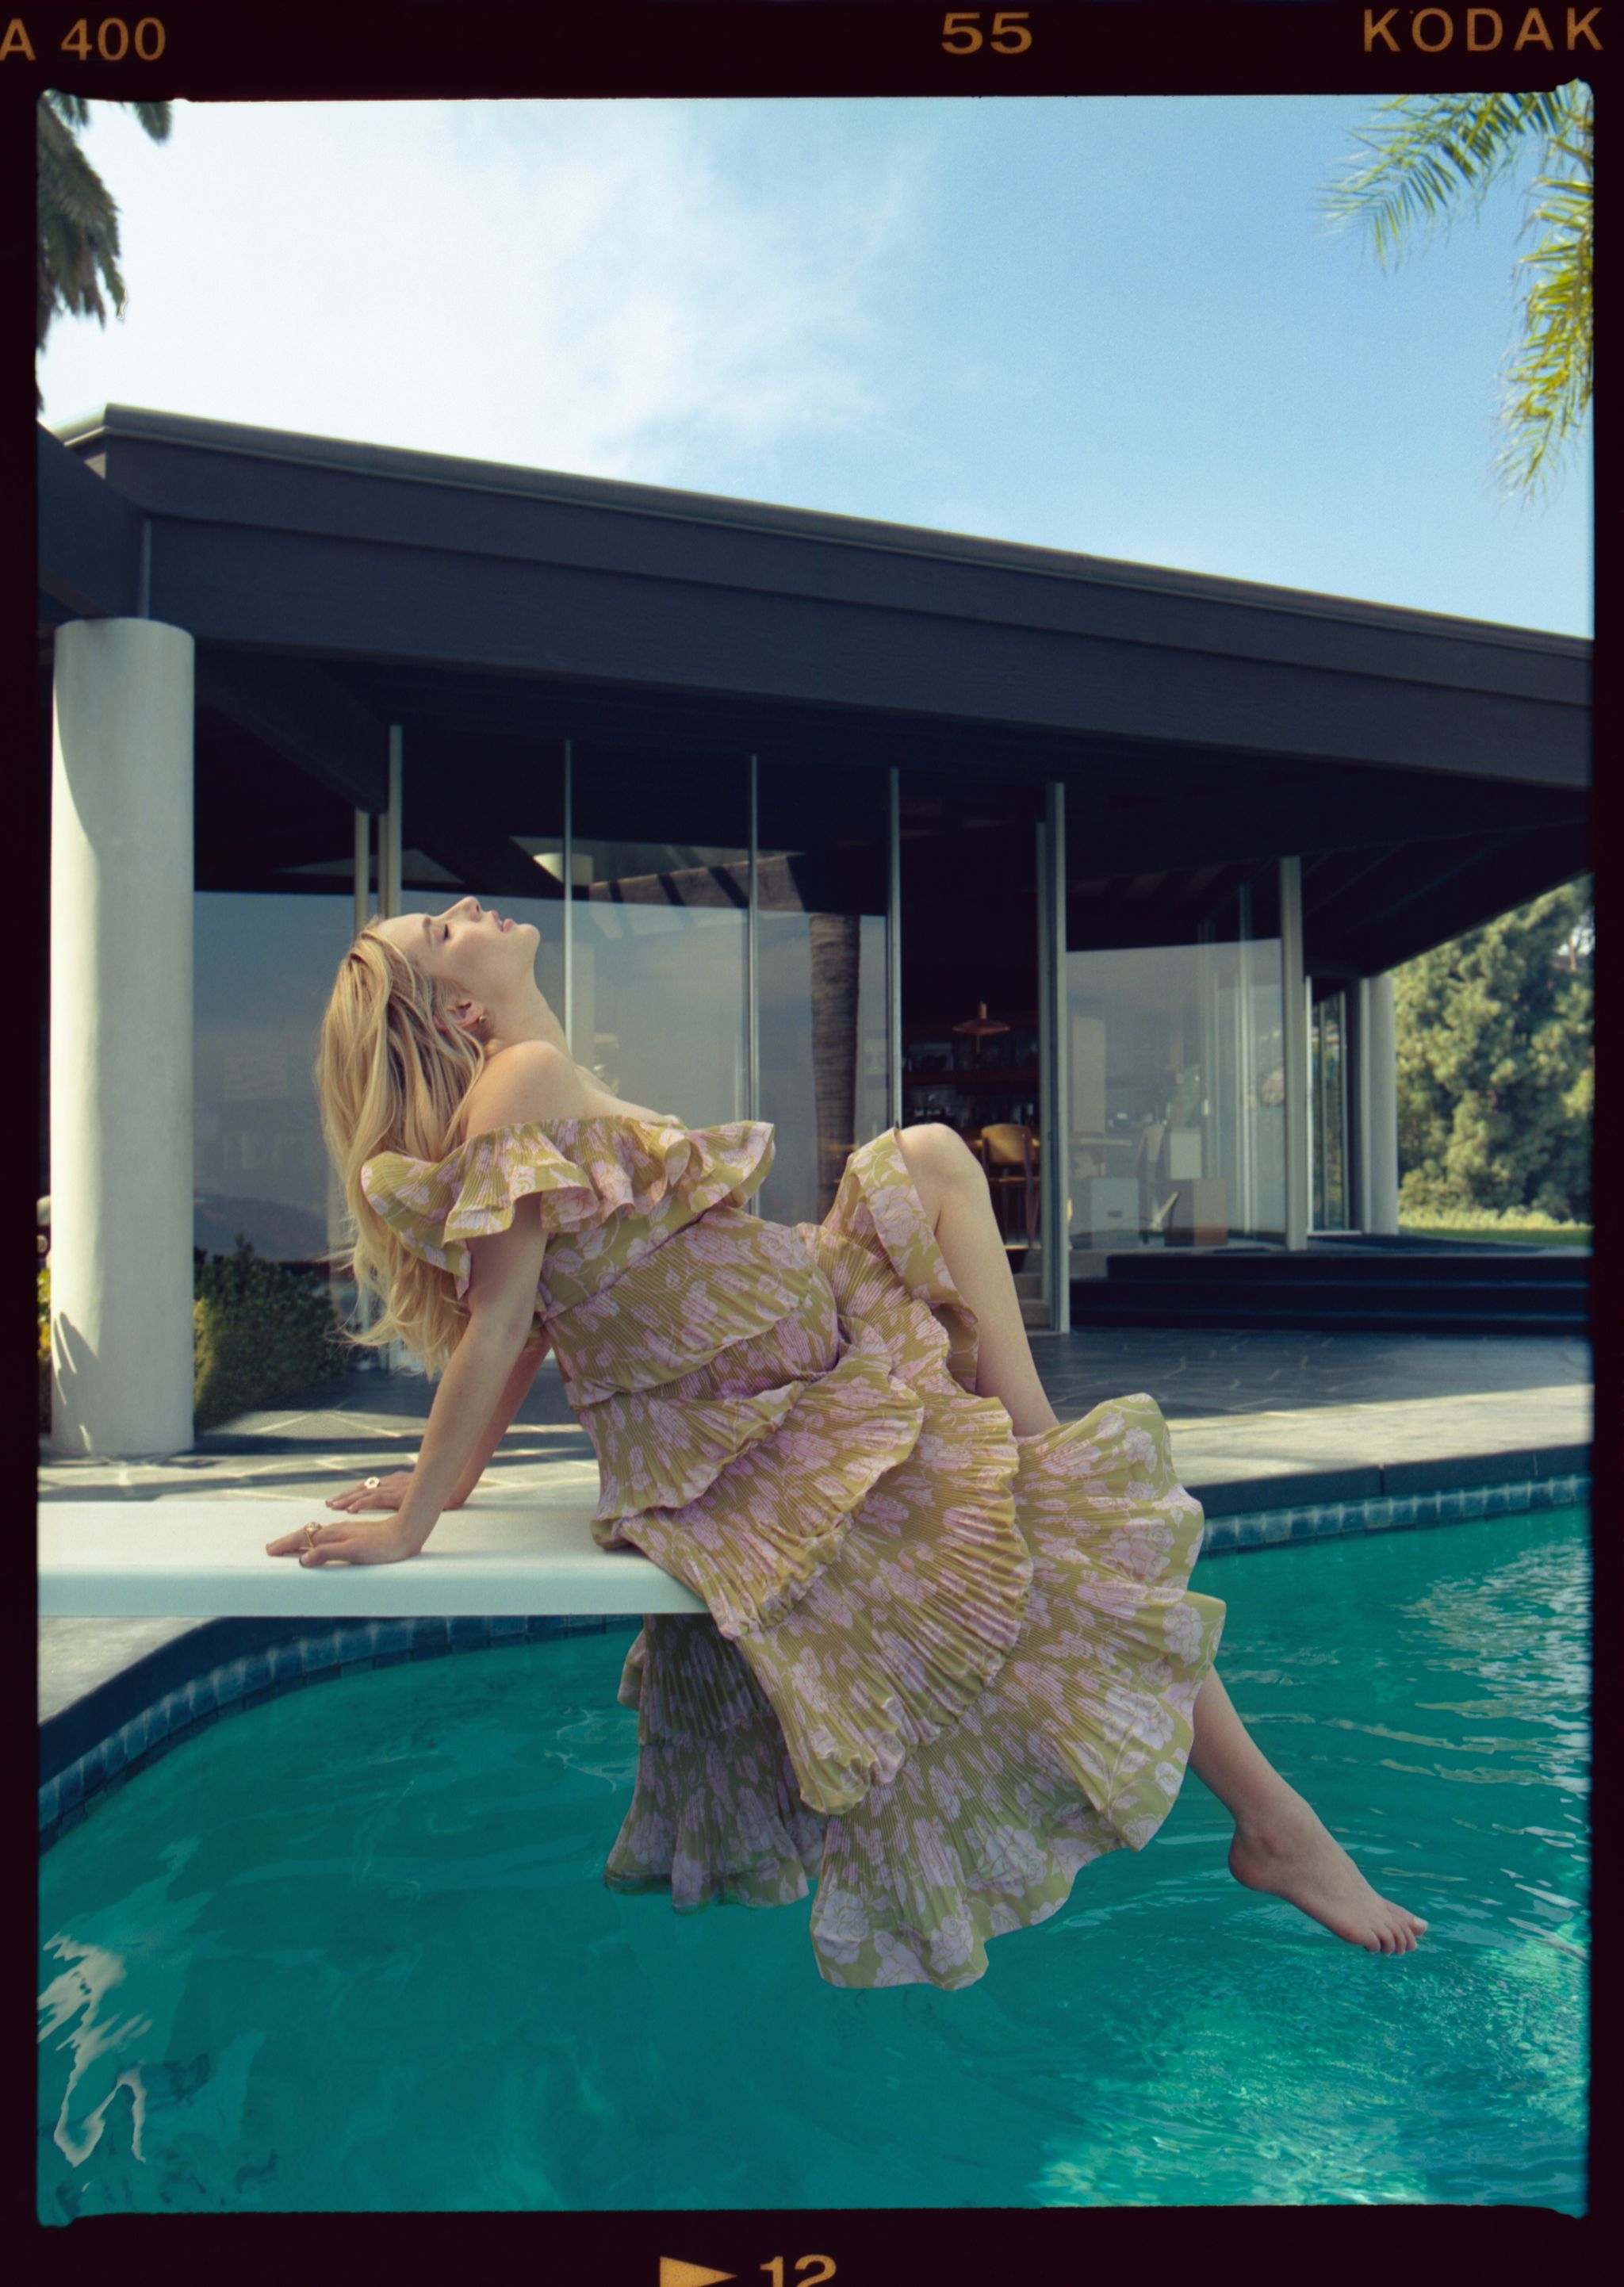 emma roberts, pregnant, wearing a green and pink rose flower dress, sitting on a diving board above pool near home looking up with closed eyes